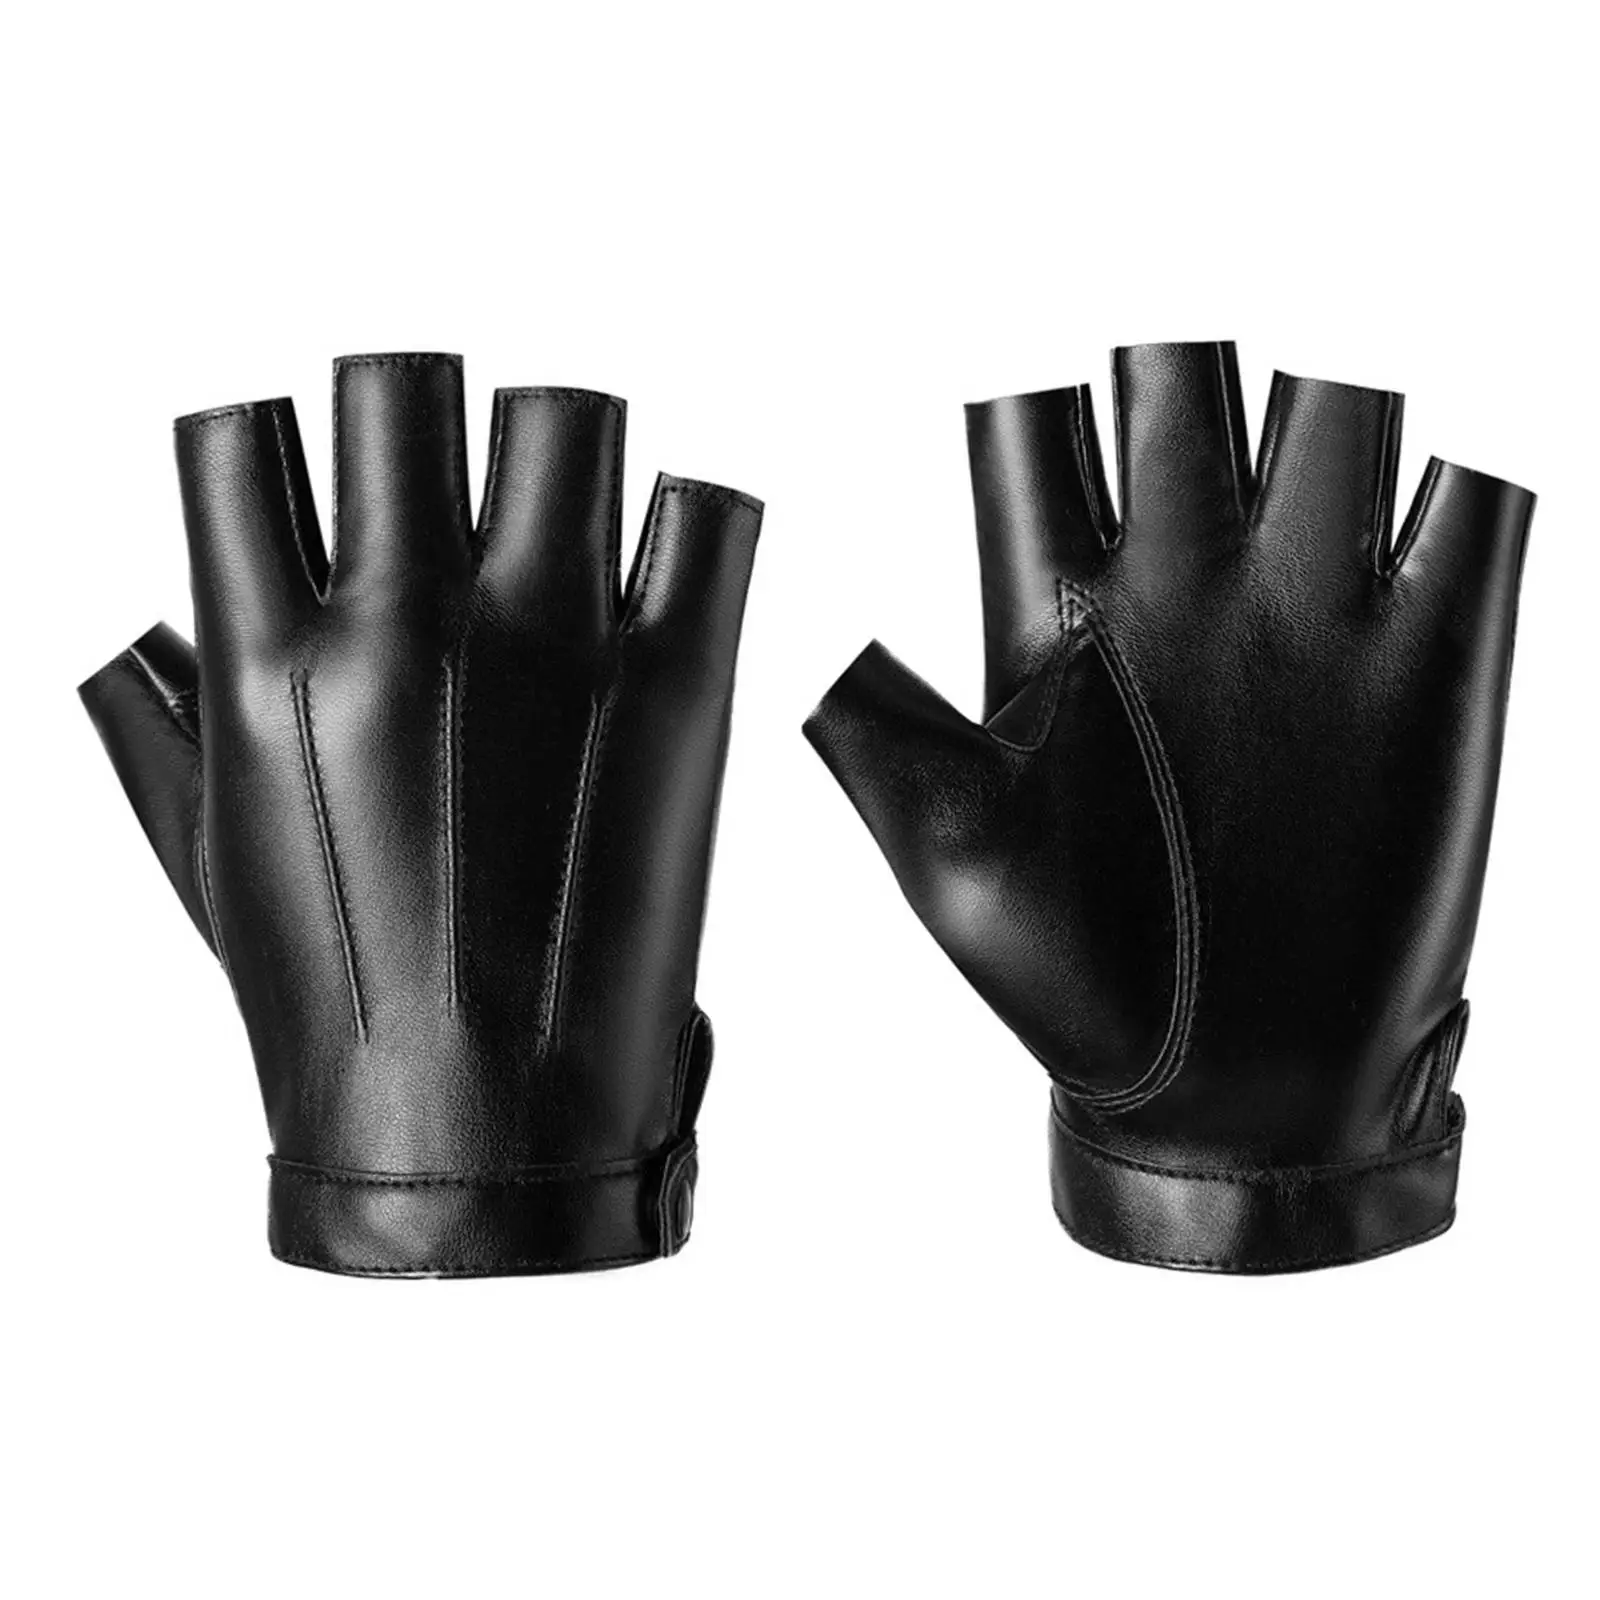 Wear Resistant PU Leather Gloves Mittens Shockproof Breathable Half Finger Gloves for Driving Outdoor Workout Training Cycling